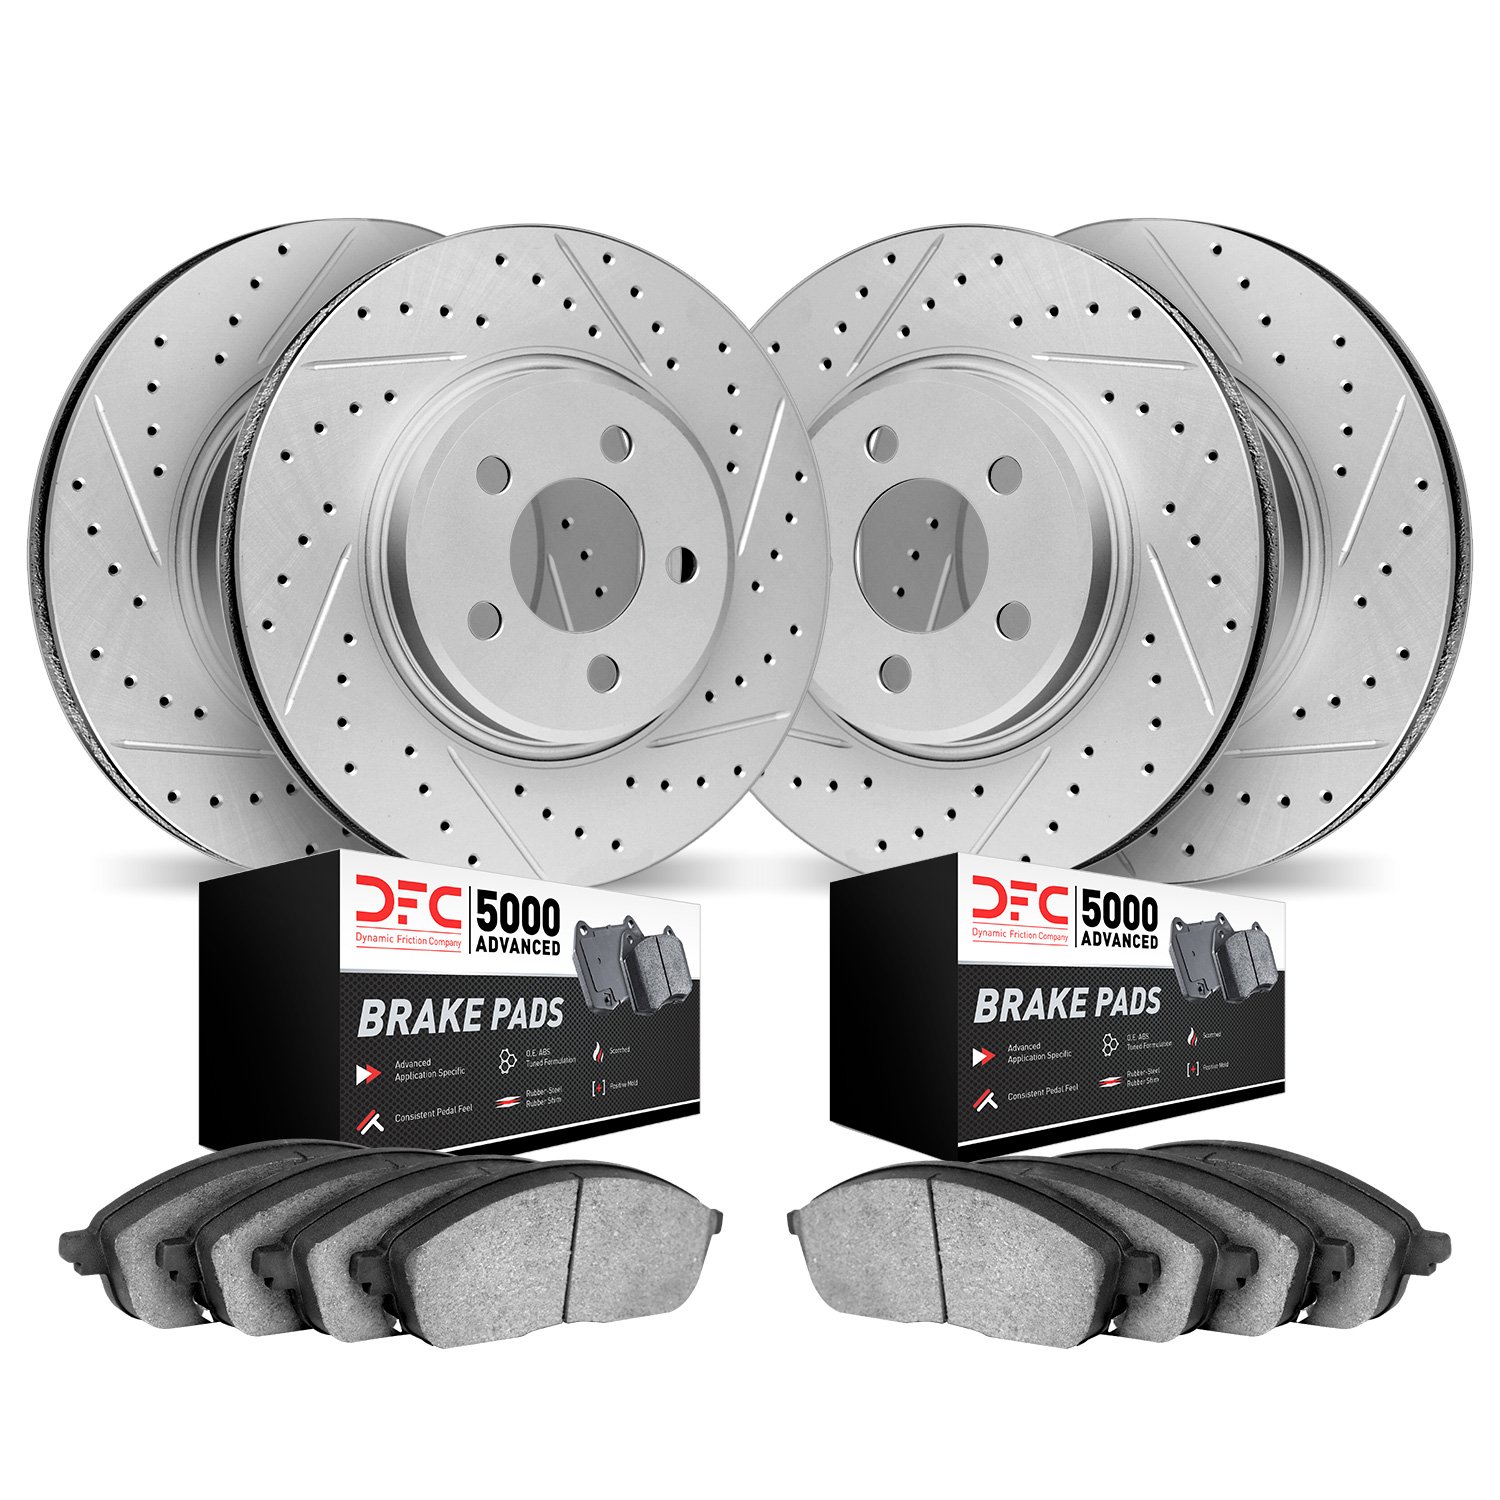 2504-31066 Geoperformance Drilled/Slotted Rotors w/5000 Advanced Brake Pads Kit, Fits Select BMW, Position: Front and Rear